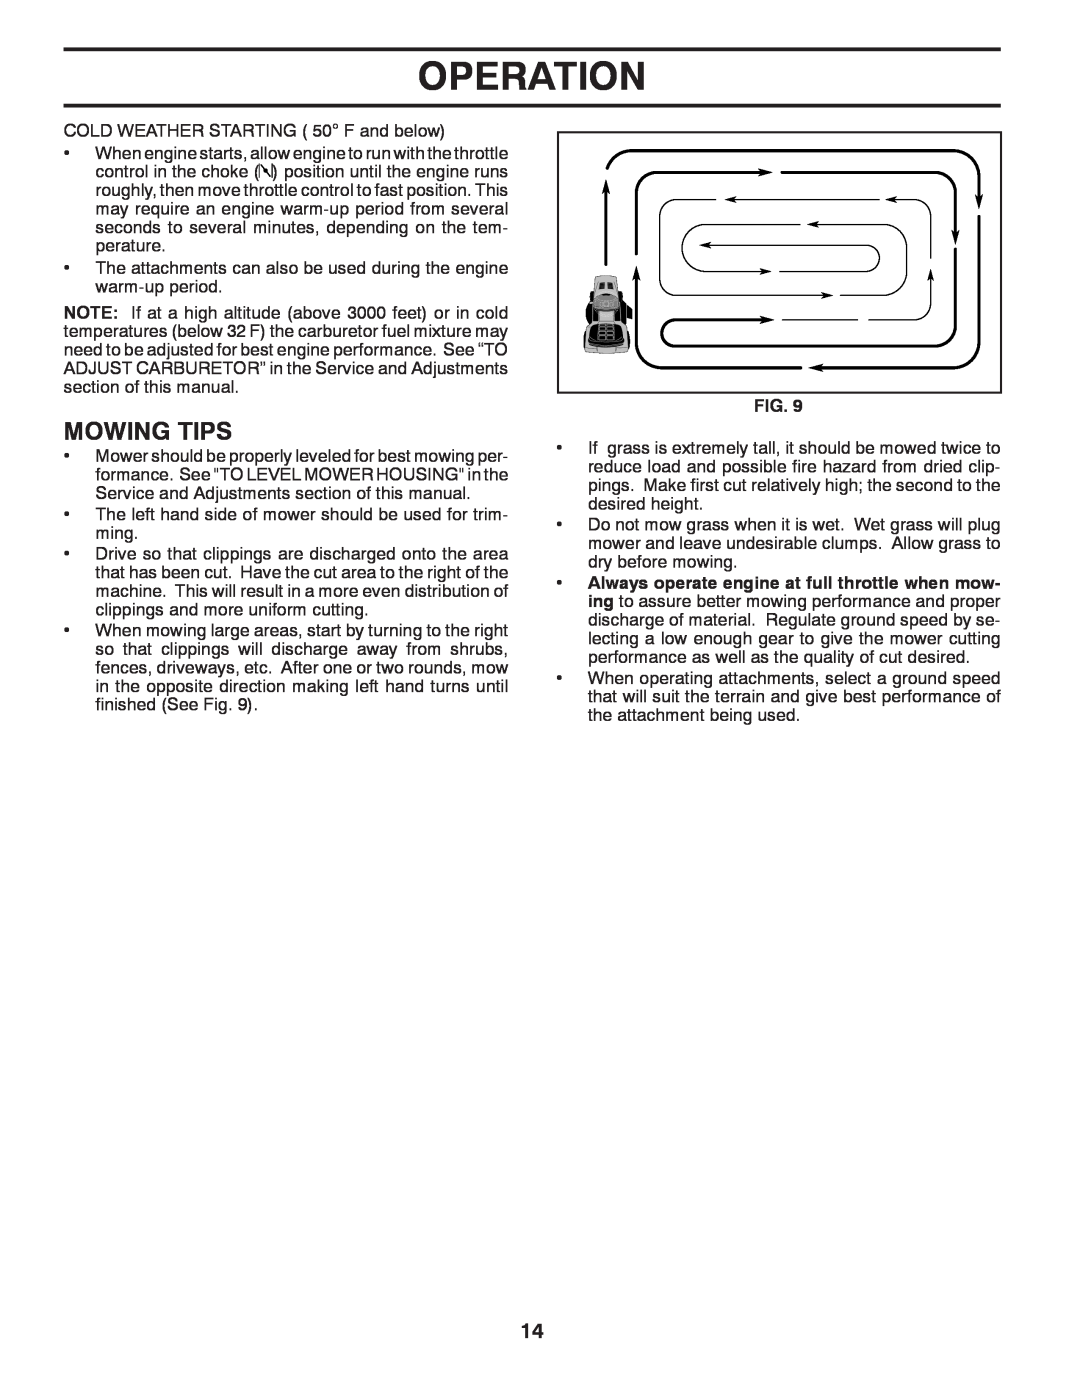 Poulan 96042002400 owner manual Mowing Tips, Operation 